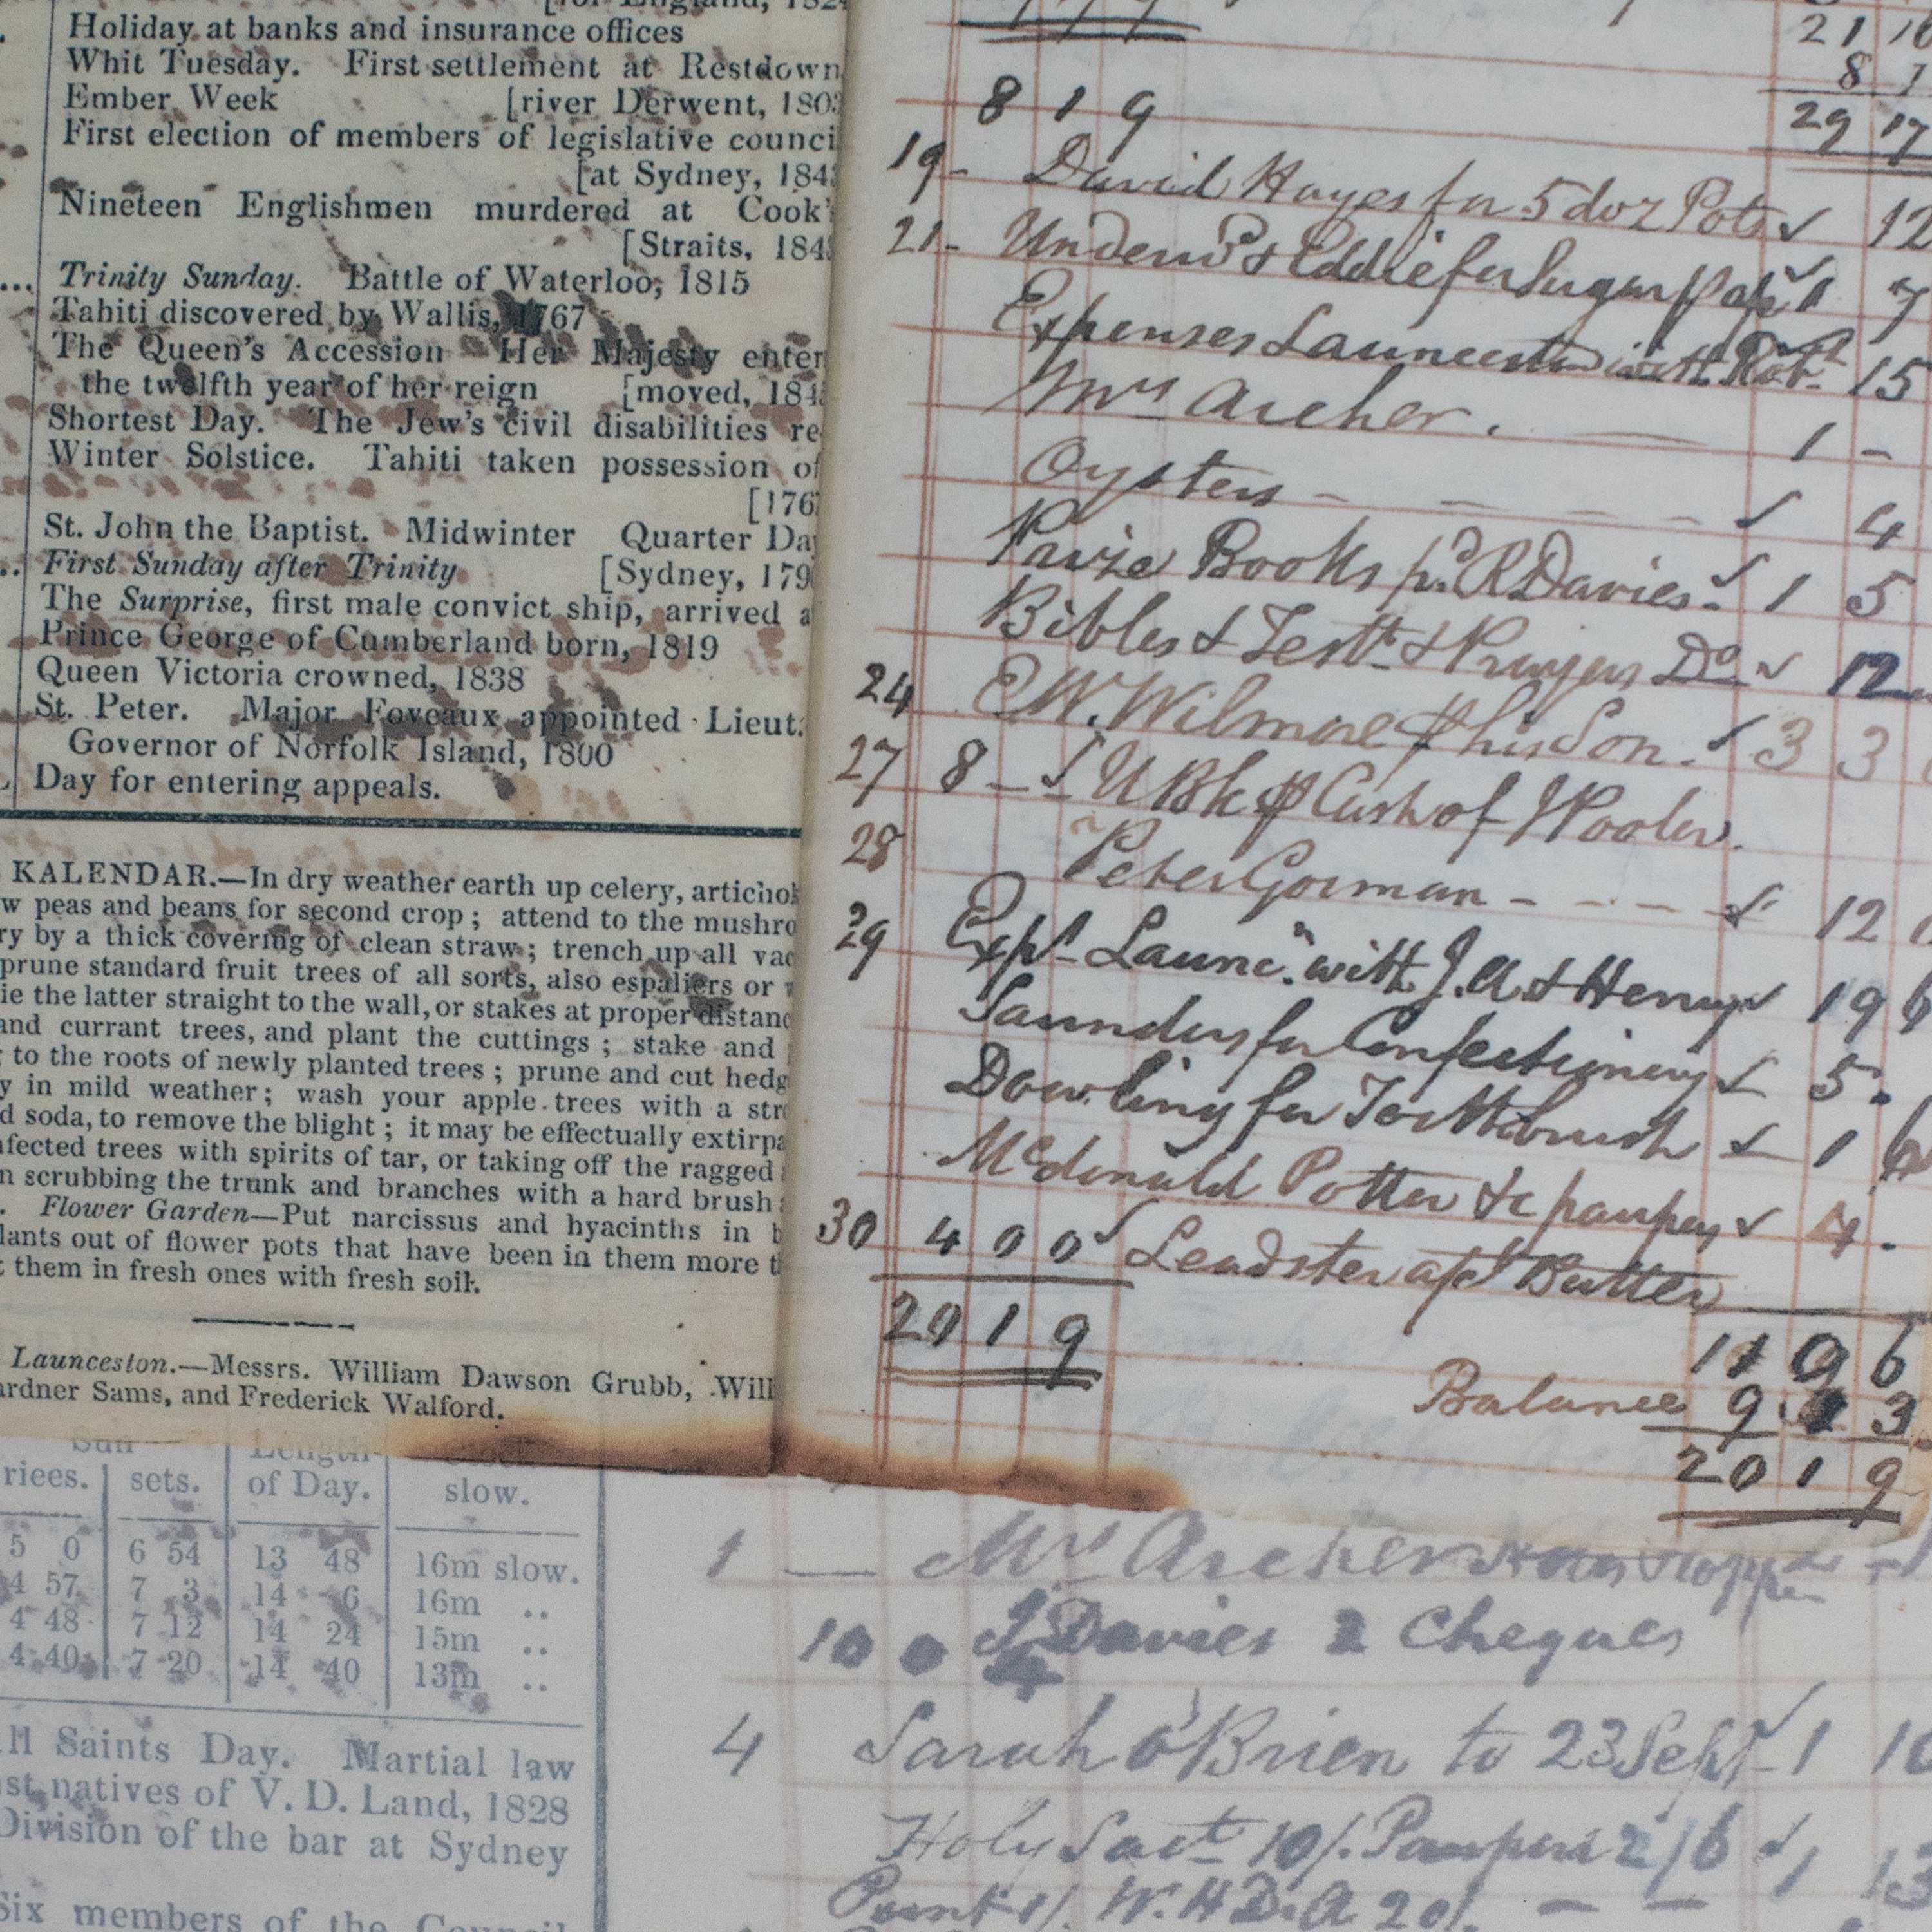 Old note book with both printed and script handwriting recording expenses for a period of time. Photo: Kieran Bradley.